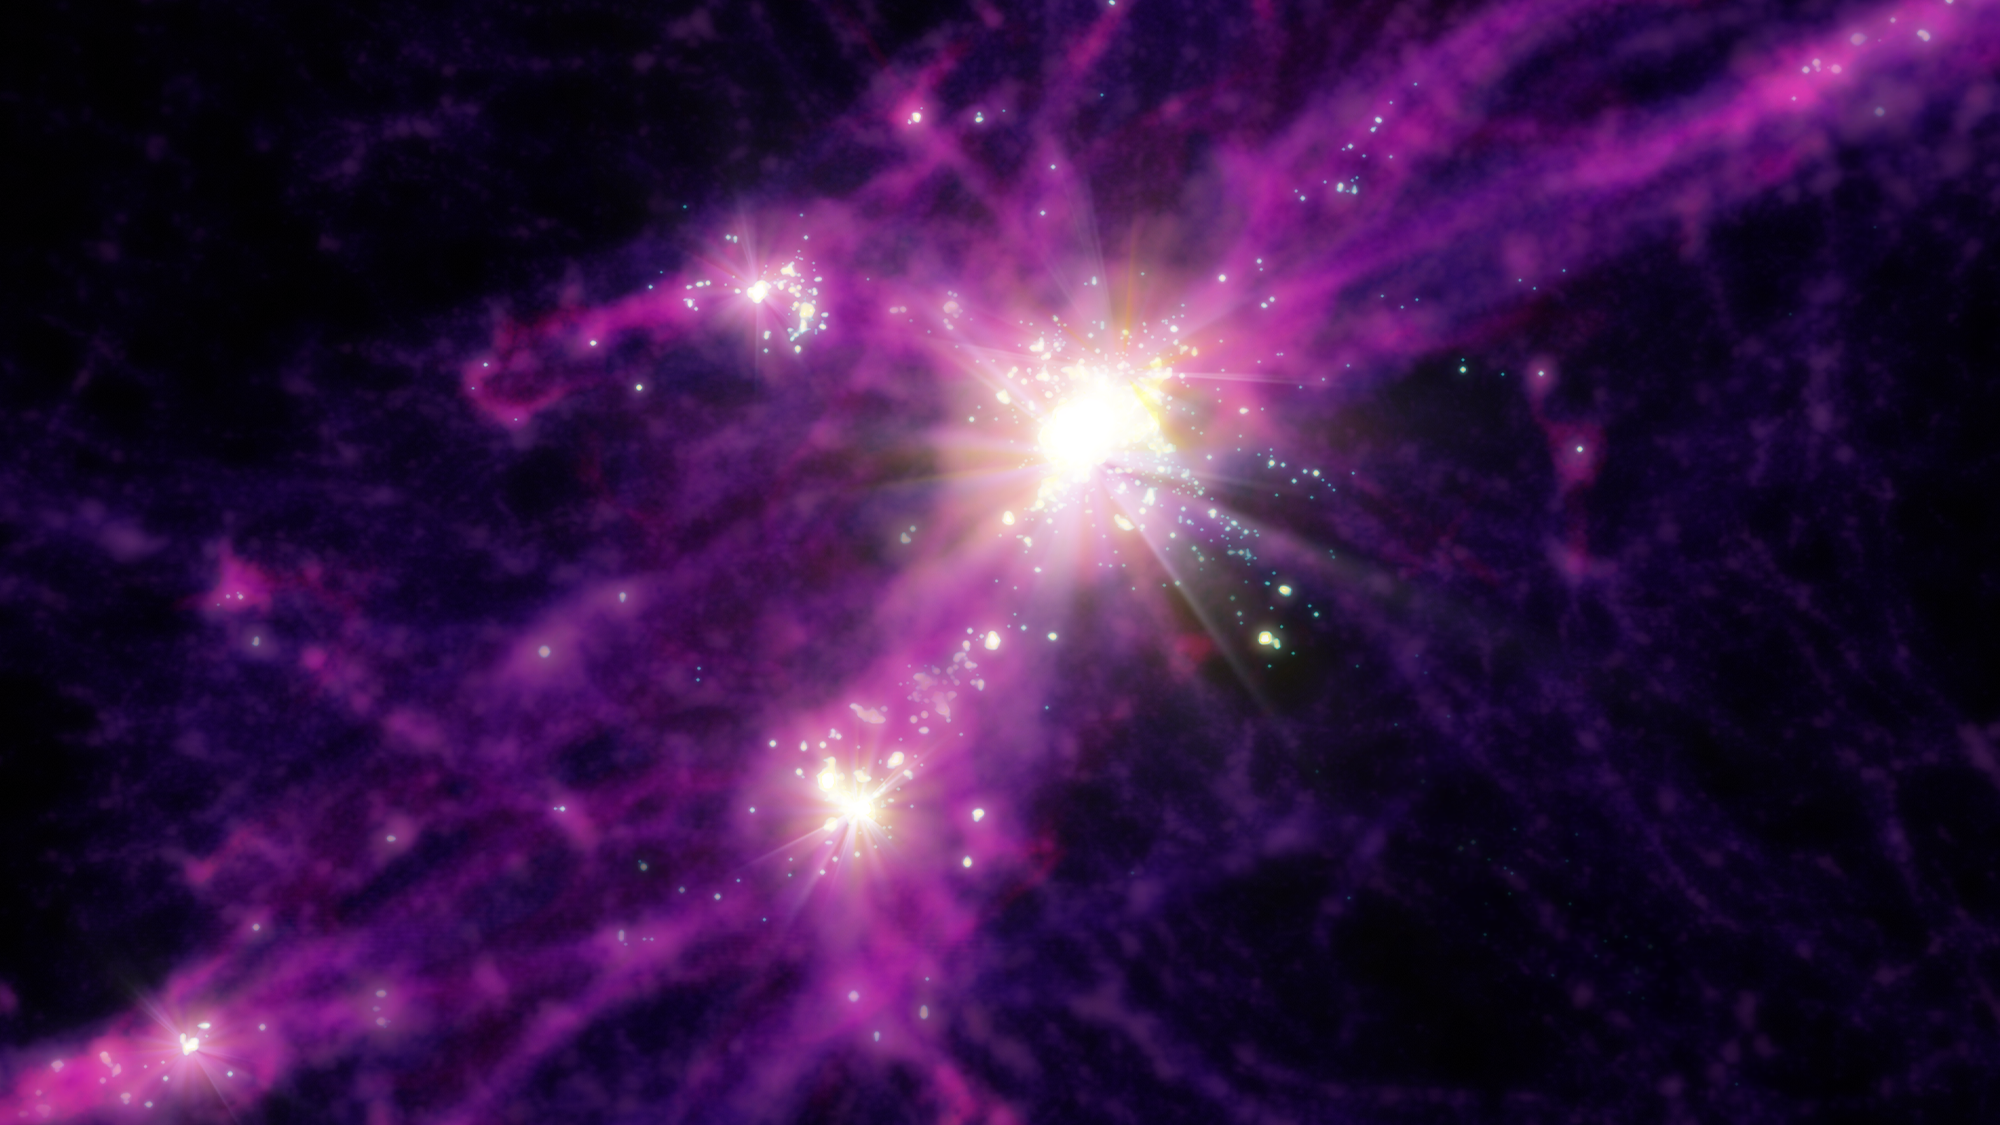 Artist conception of early starbursting galaxies. The image is rendered from FIRE simulation data used for this research that can explain recent JWST results. Stars and galaxies are shown in the bright white points of light, while the more diffuse dark matter and gas are shown in purples and reds.